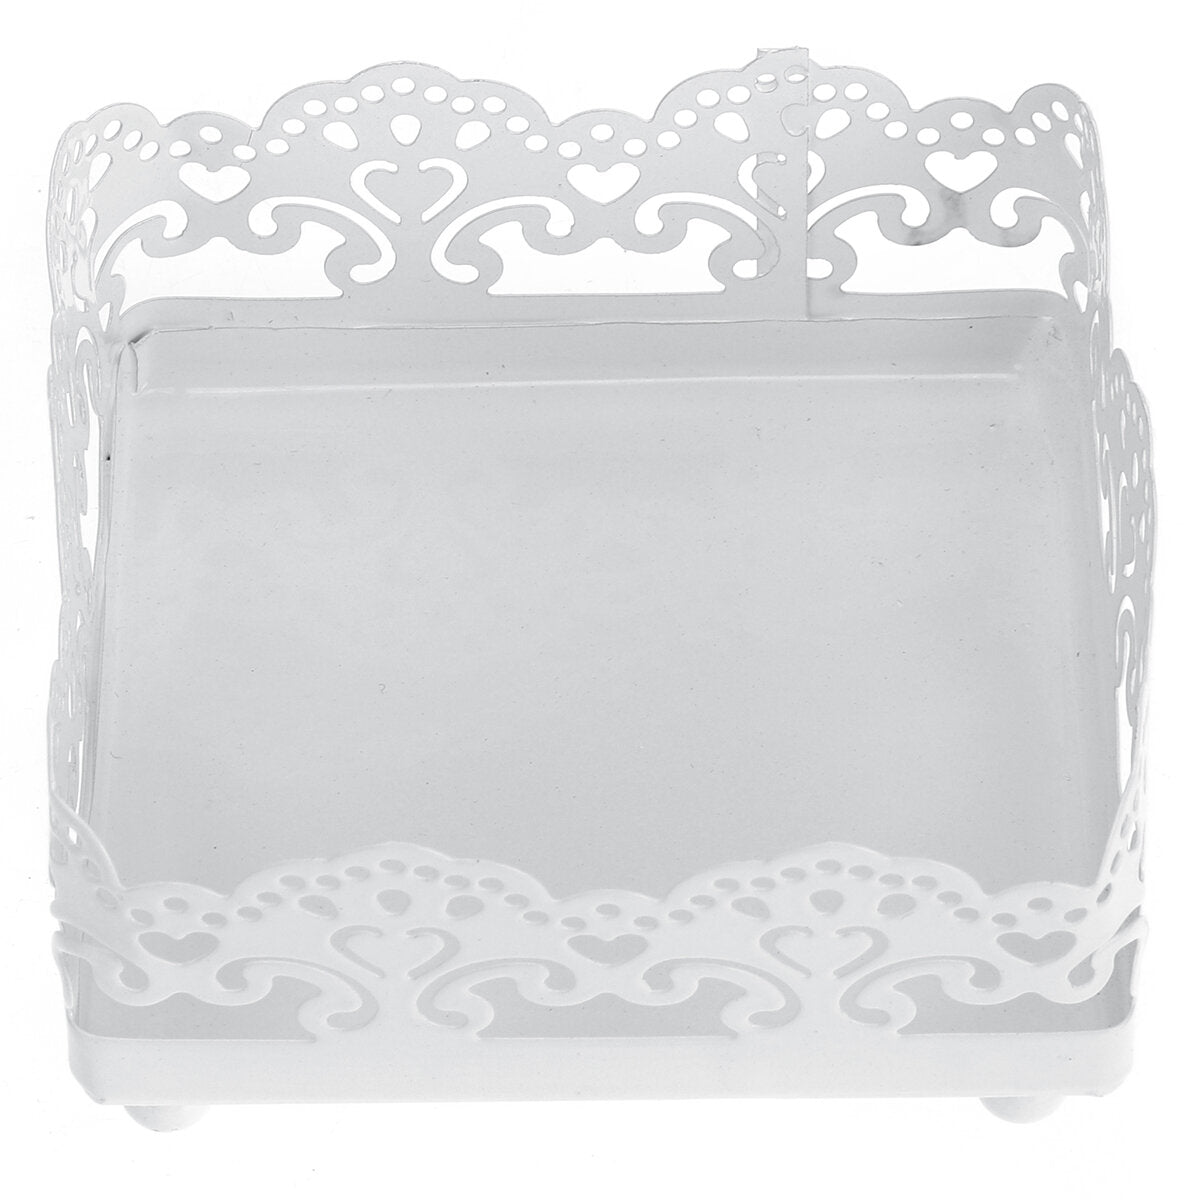 Wrought Iron Lace White Cake Display Stand Non-toxic Food-safe Cake Dessert Stand Wedding Props